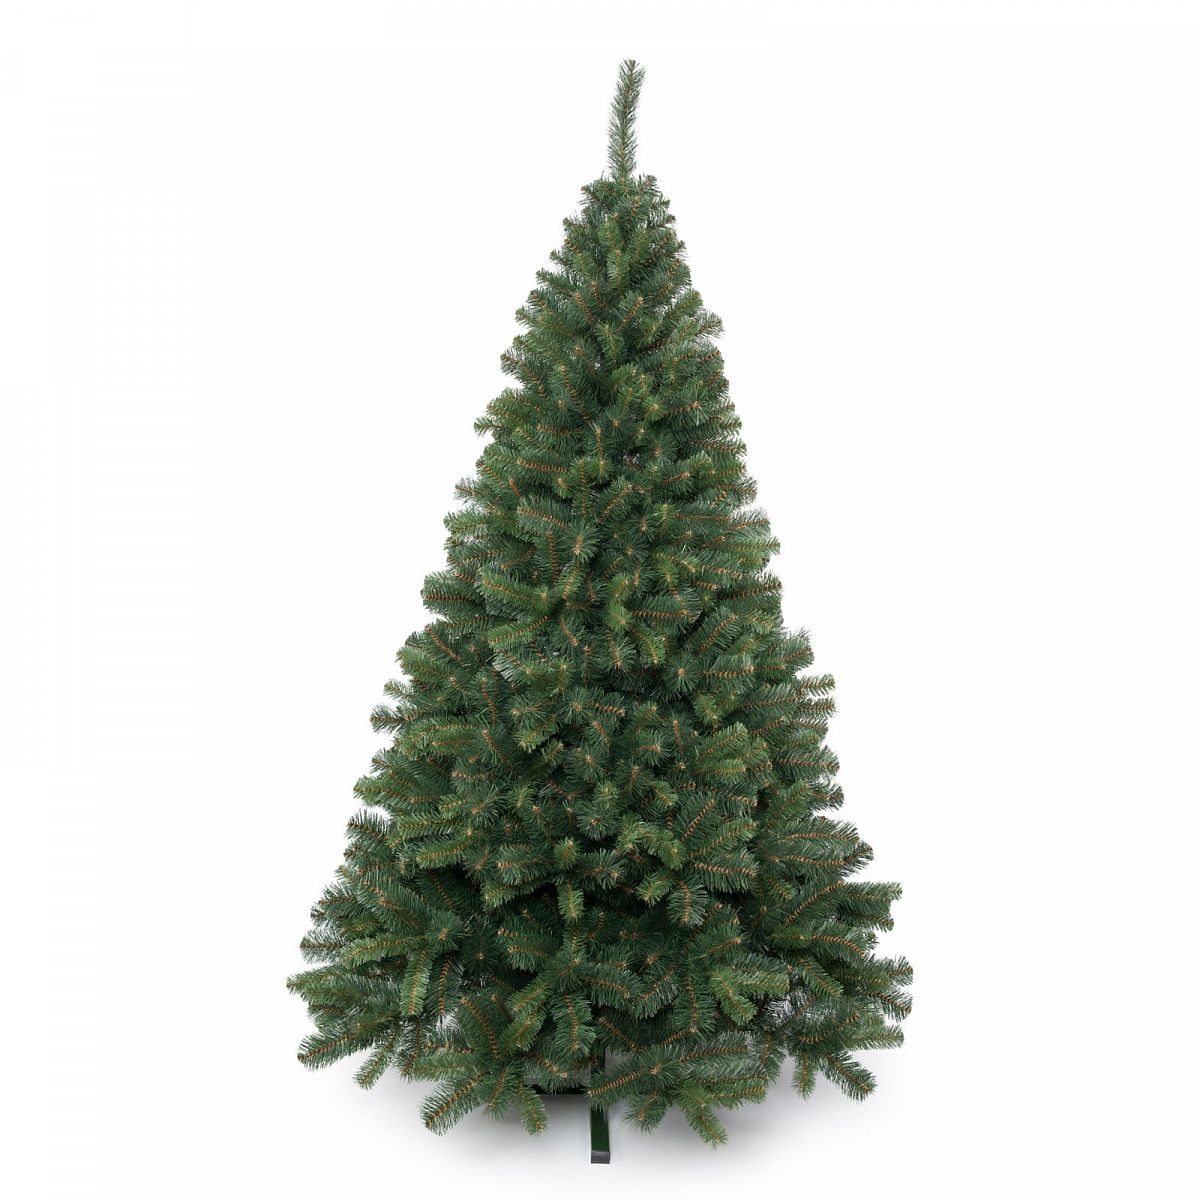 XMMS Birmingham Artificial Christmas Tree with Tree Skirt & Cotton Gloves Mixed Pine and Fir Green N